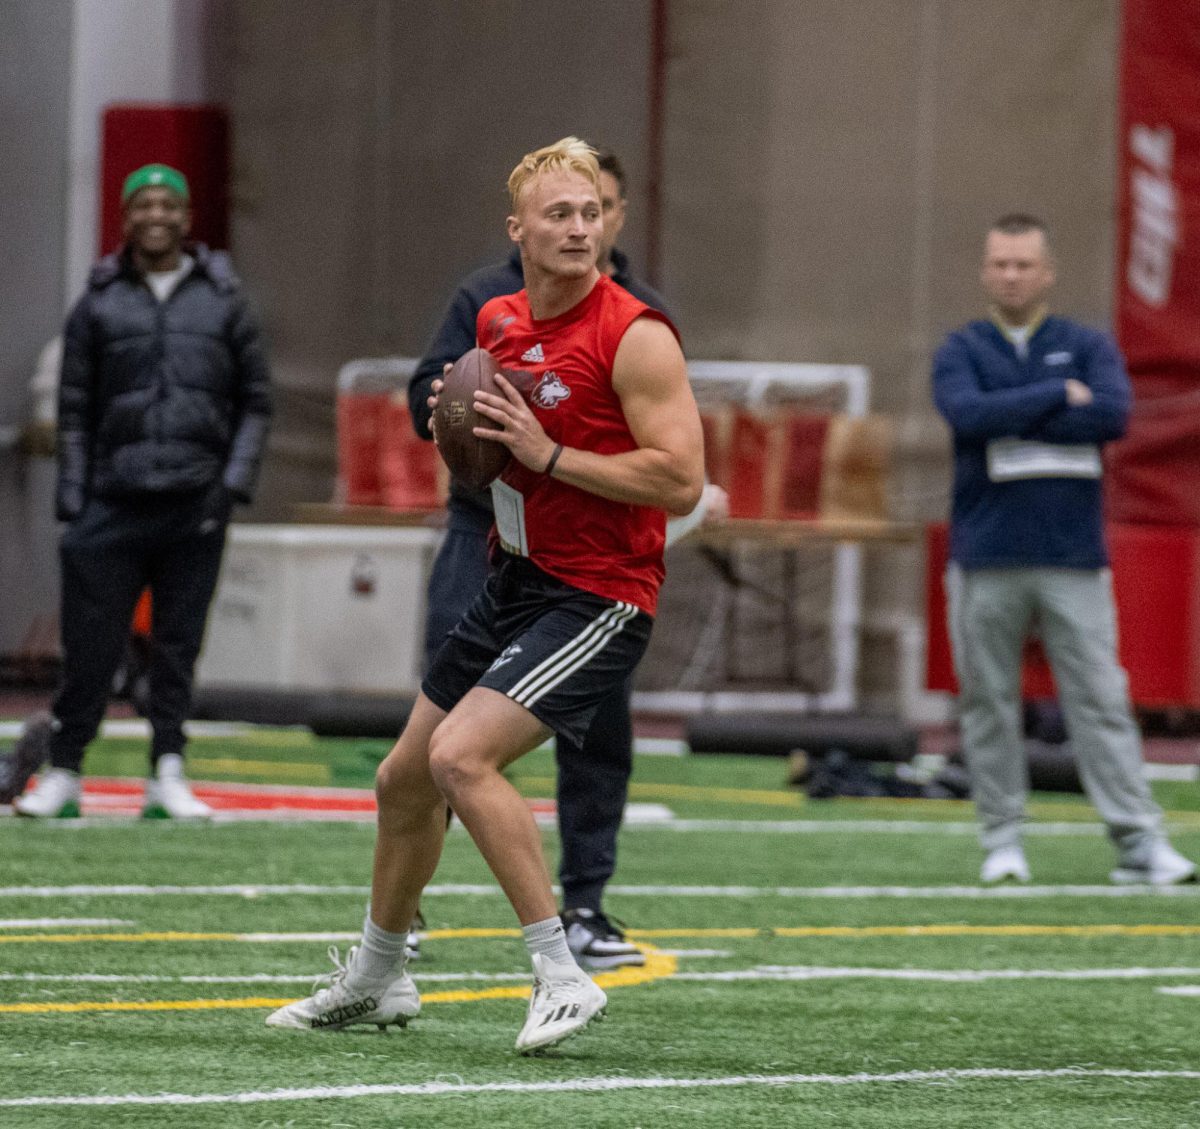 Former NIU quarterback Rocky Lombardi drops back during passing drills at Thursdays Pro Day inside the Chessick Practice Center. Lombardi worked out in front of scouts from at least 11 NFL teams. (Tim Dodge | Northern Star)